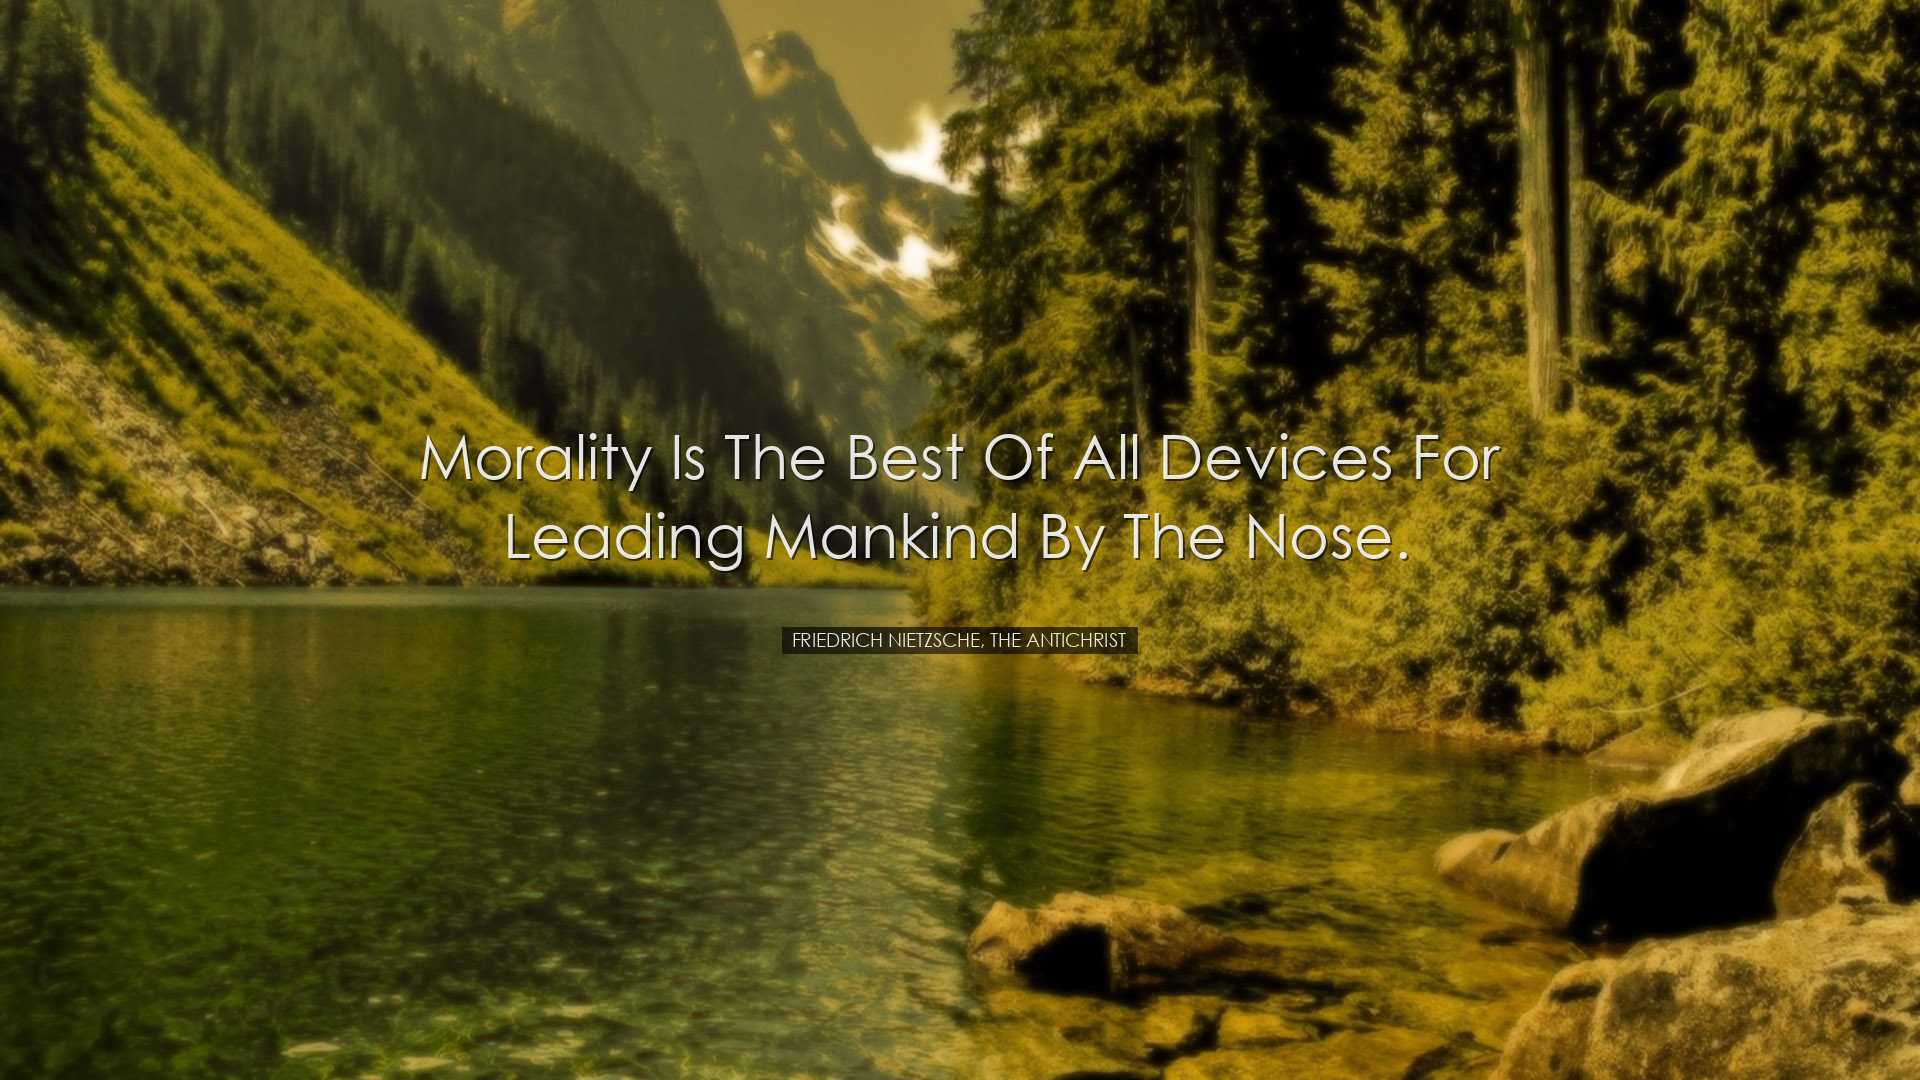 Morality is the best of all devices for leading mankind by the nos